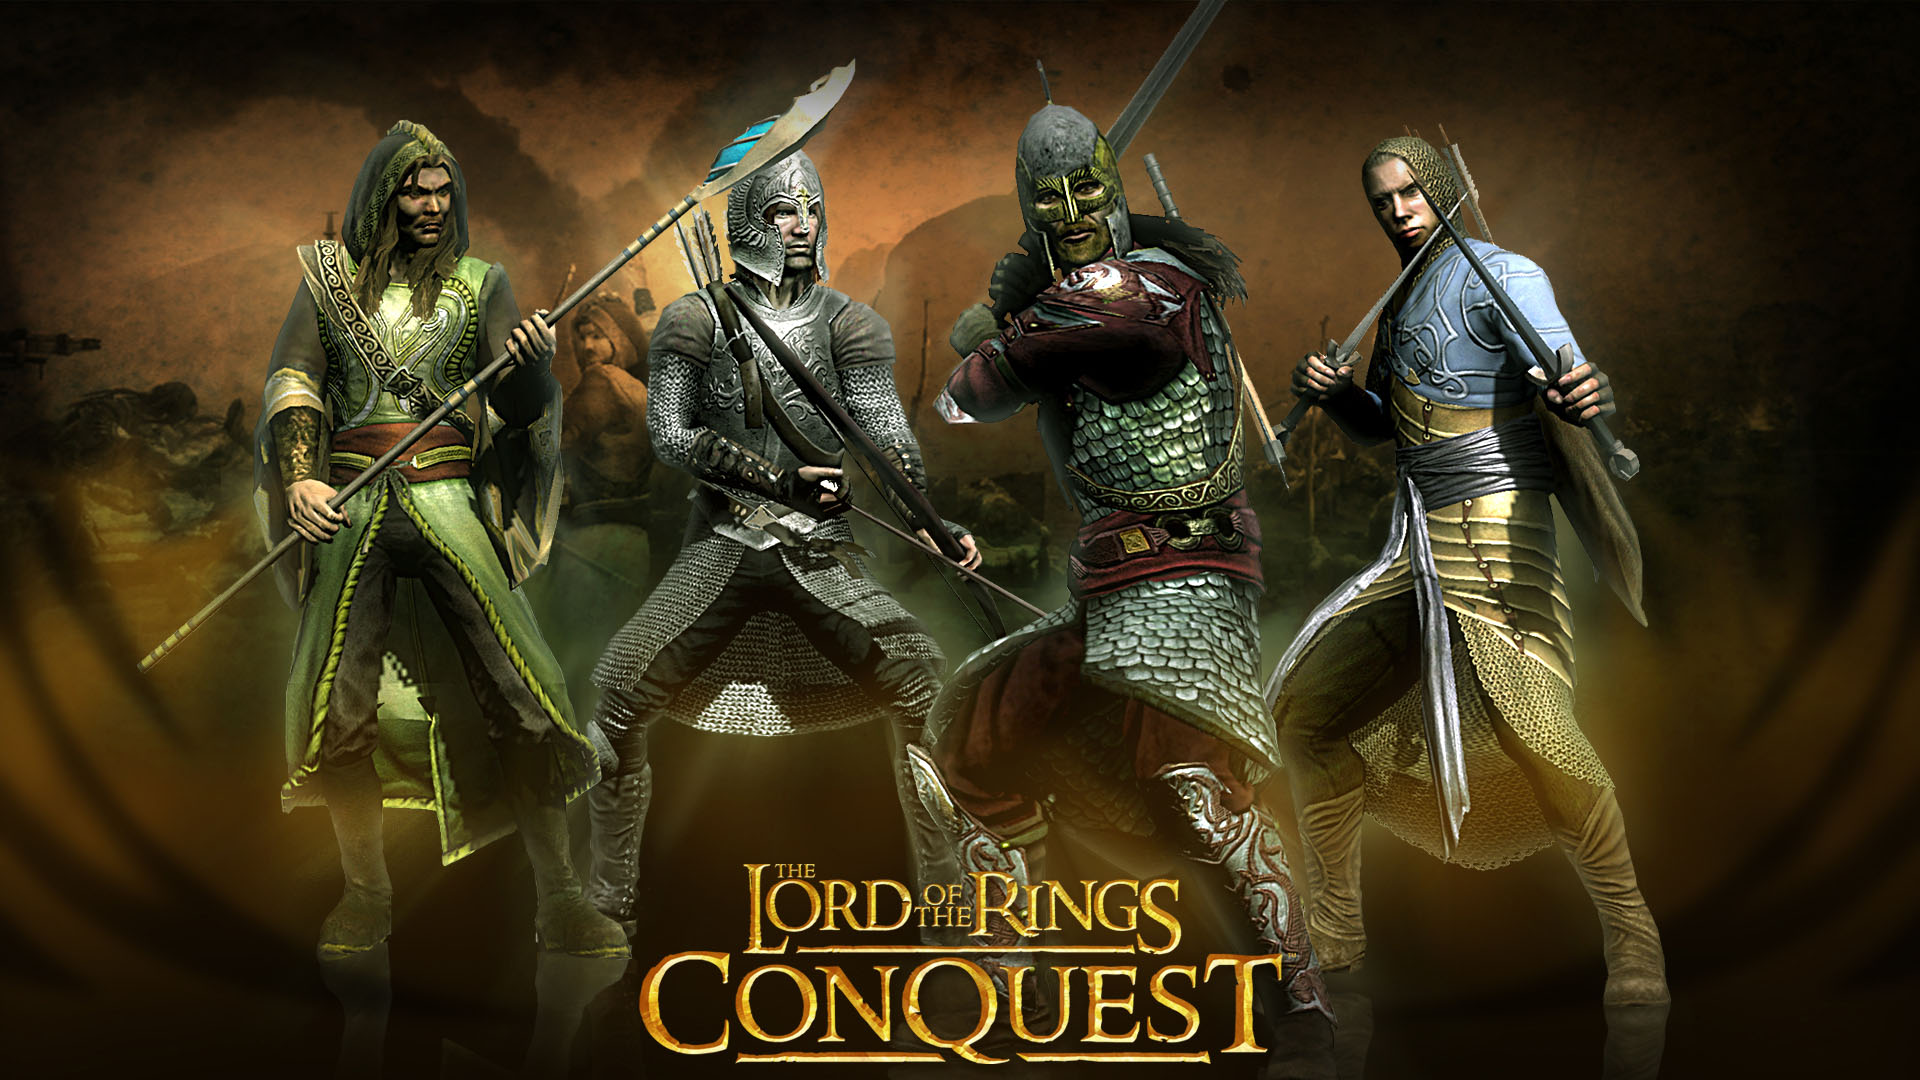 The Lord of the Rings: Conquest Free Download PC windows game